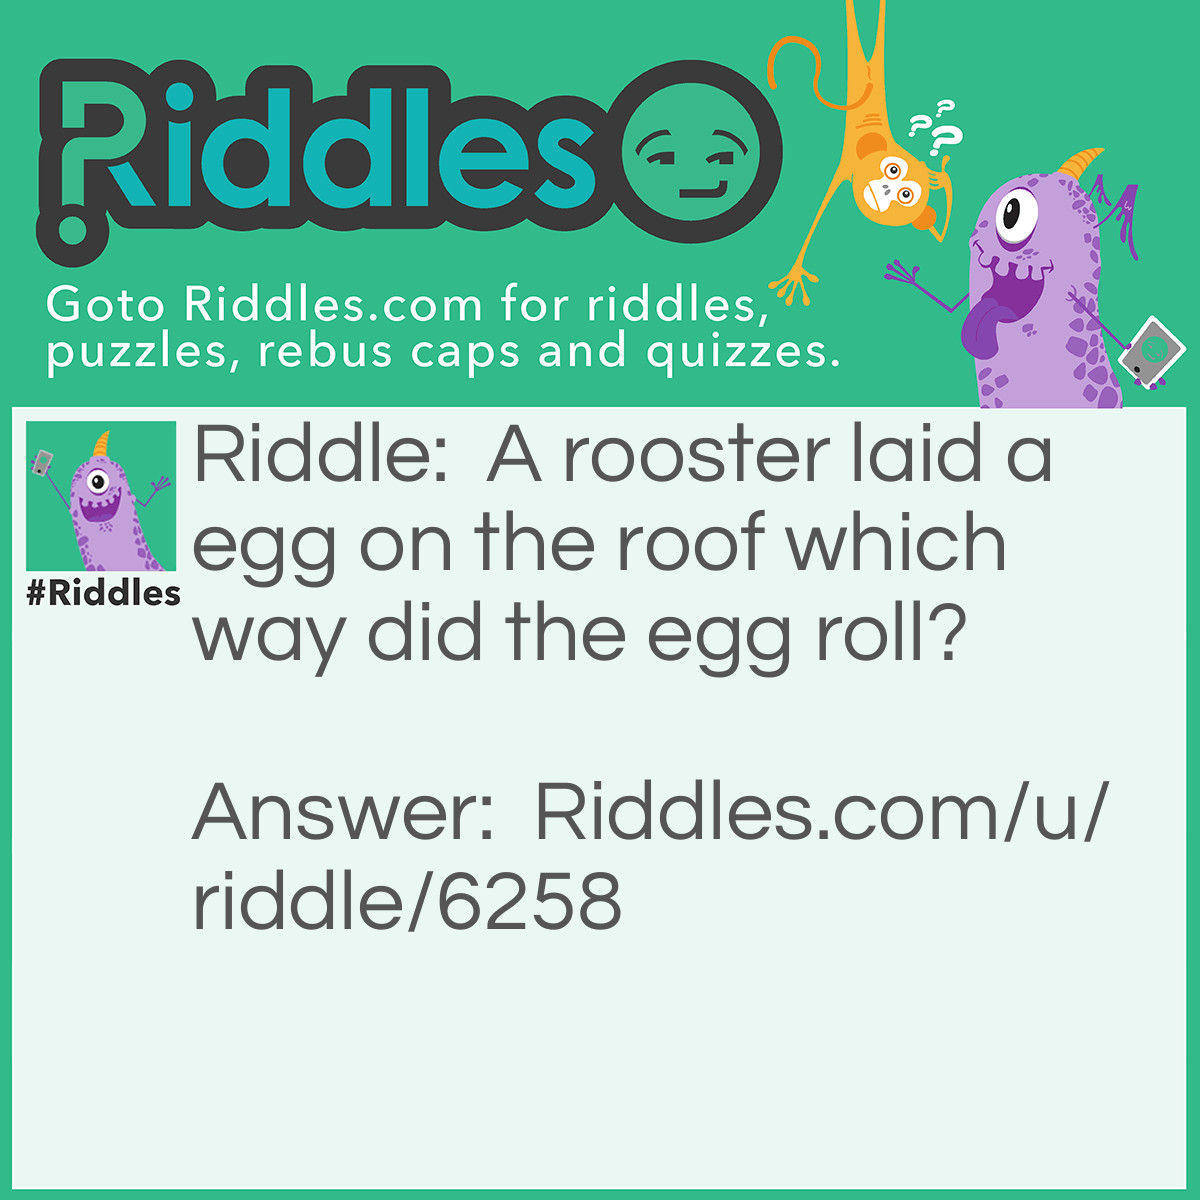 Riddle: A rooster laid a egg on the roof which way did the egg roll? Answer: No where, roosters don't lay eggs.